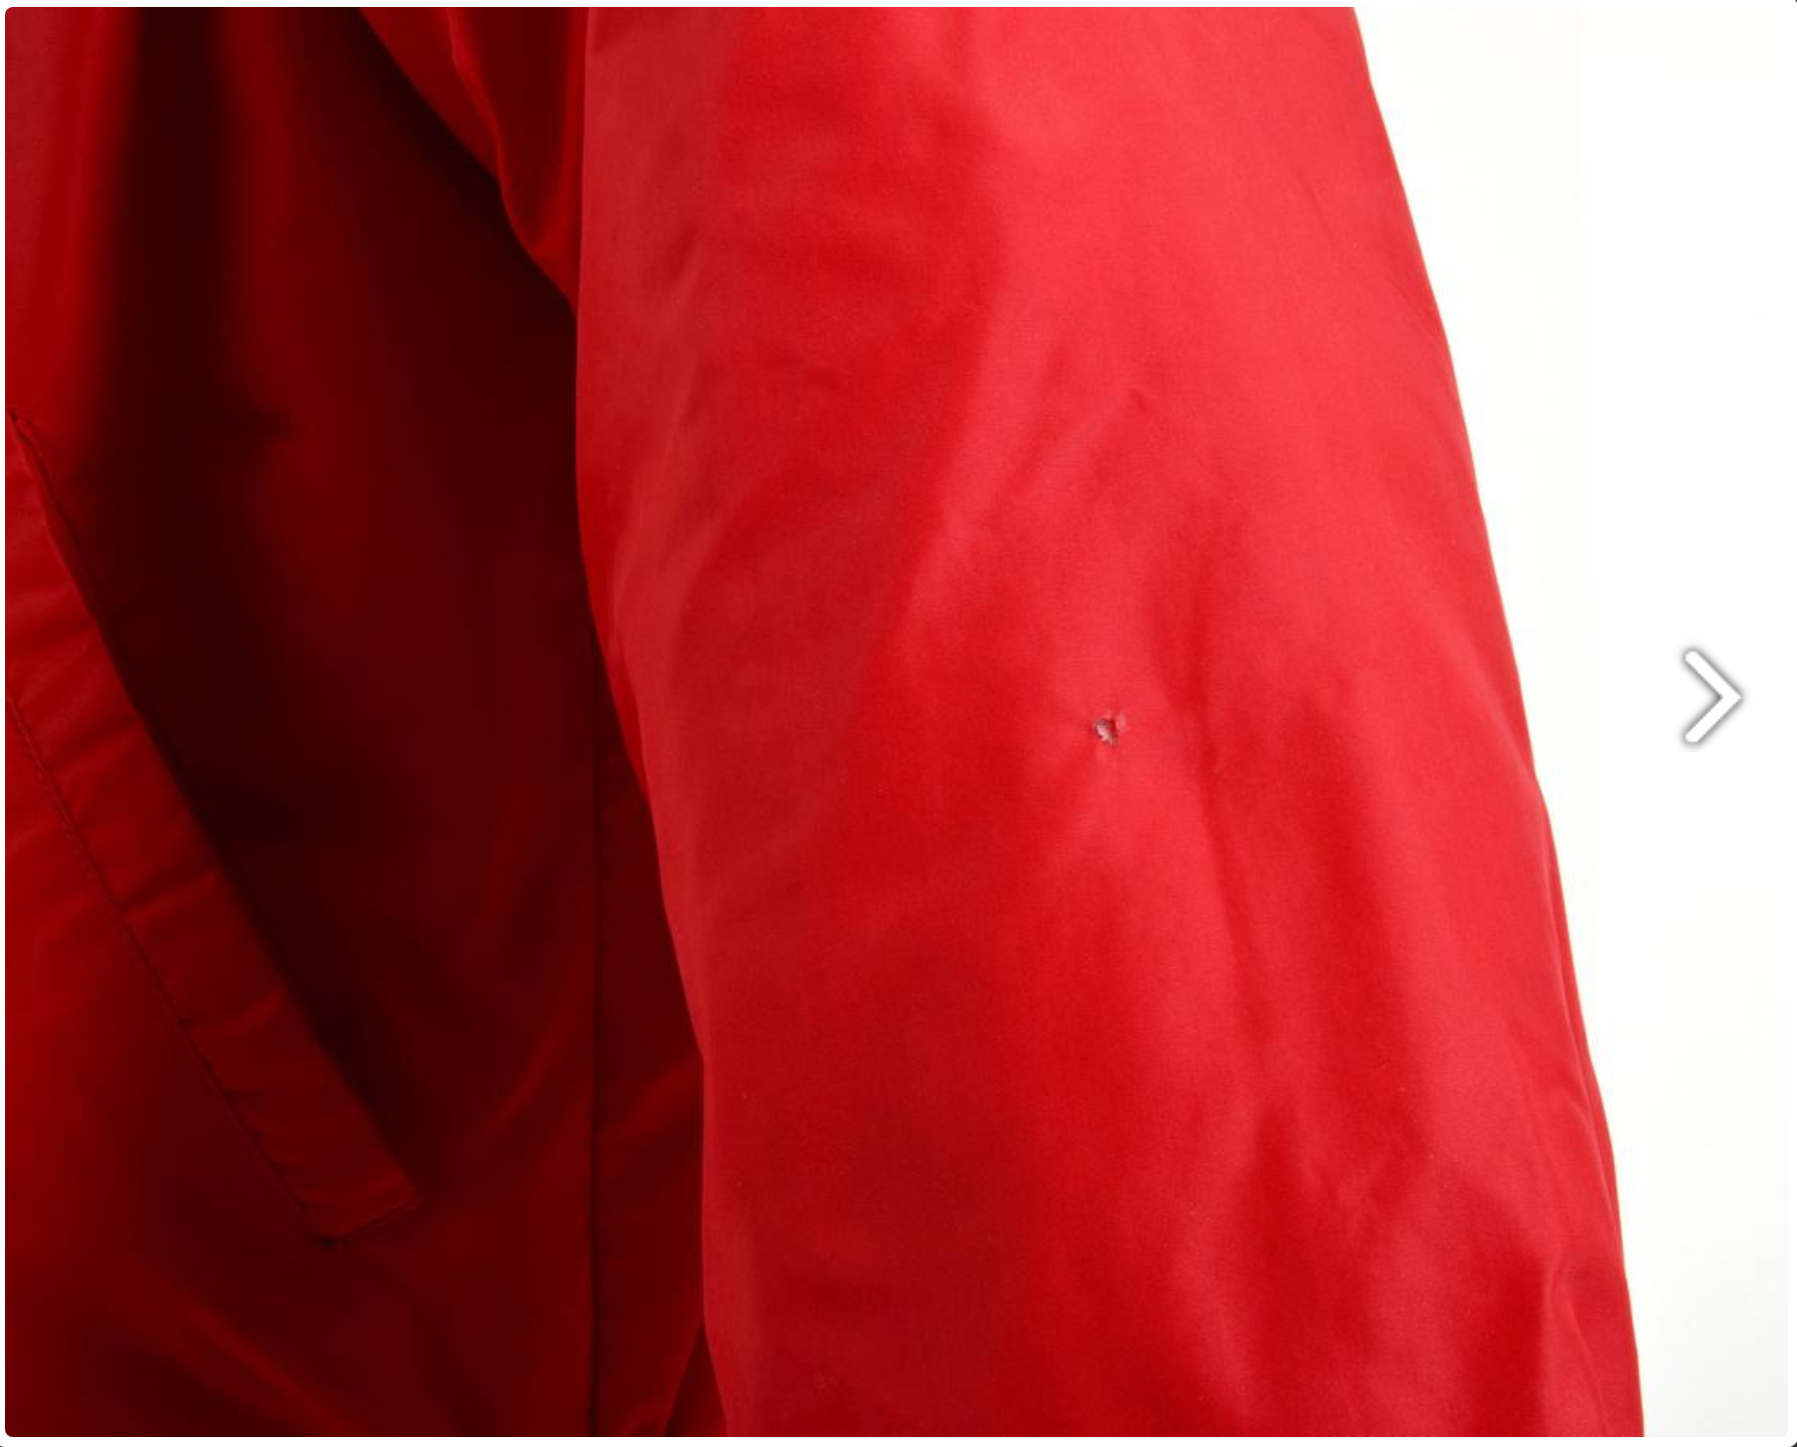 UNSOLD: James Dean “Rebel Without A Cause” Red Jacket Fails To Sell In ...